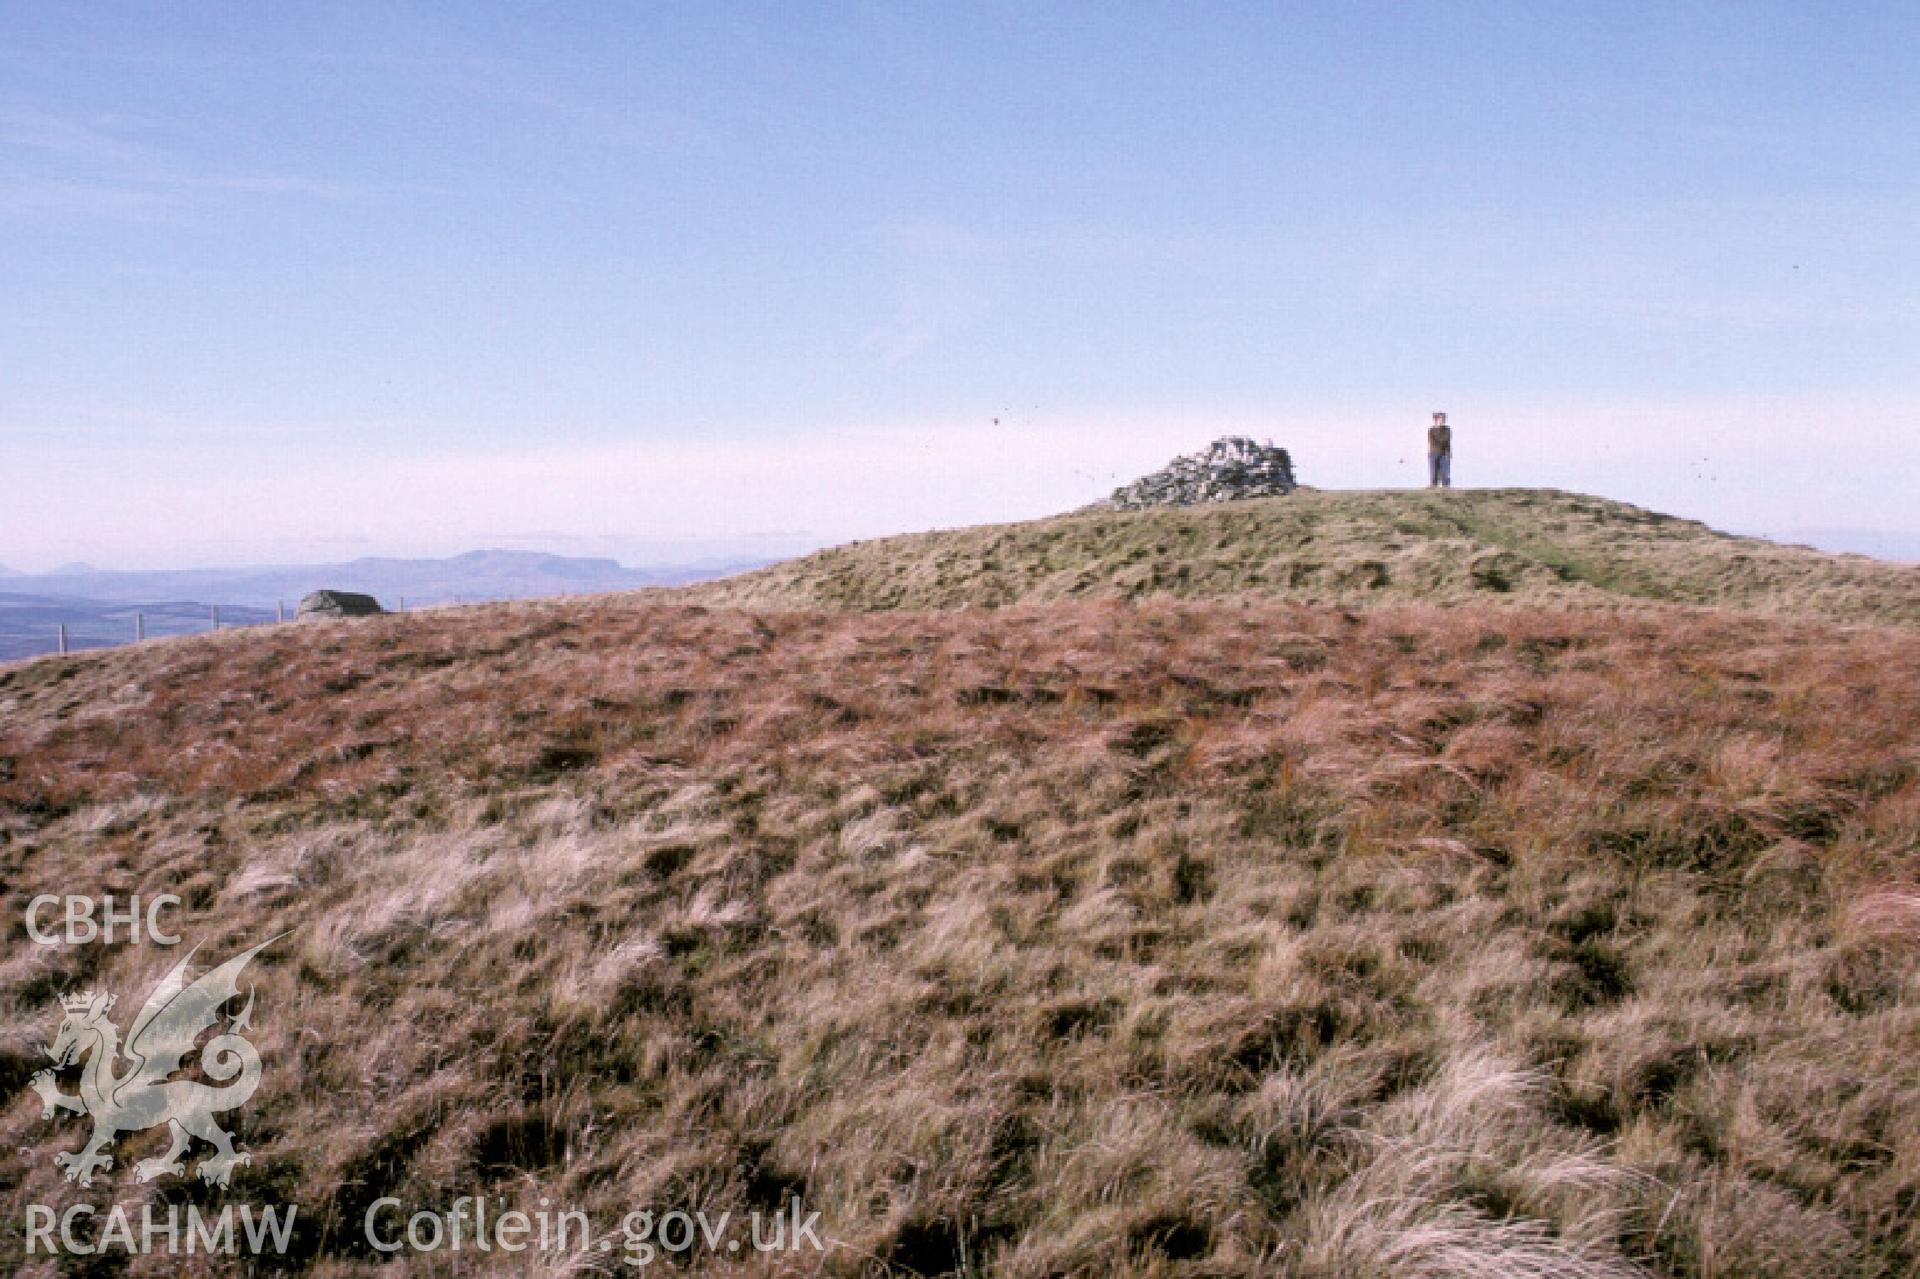 Photograph of Cader Bronwen Barrow from the east-north-east. Taken by R. Hankinson on 29/11/2004 during an upland survey undertaken by the Clwyd-Powys Archaeological Trust.